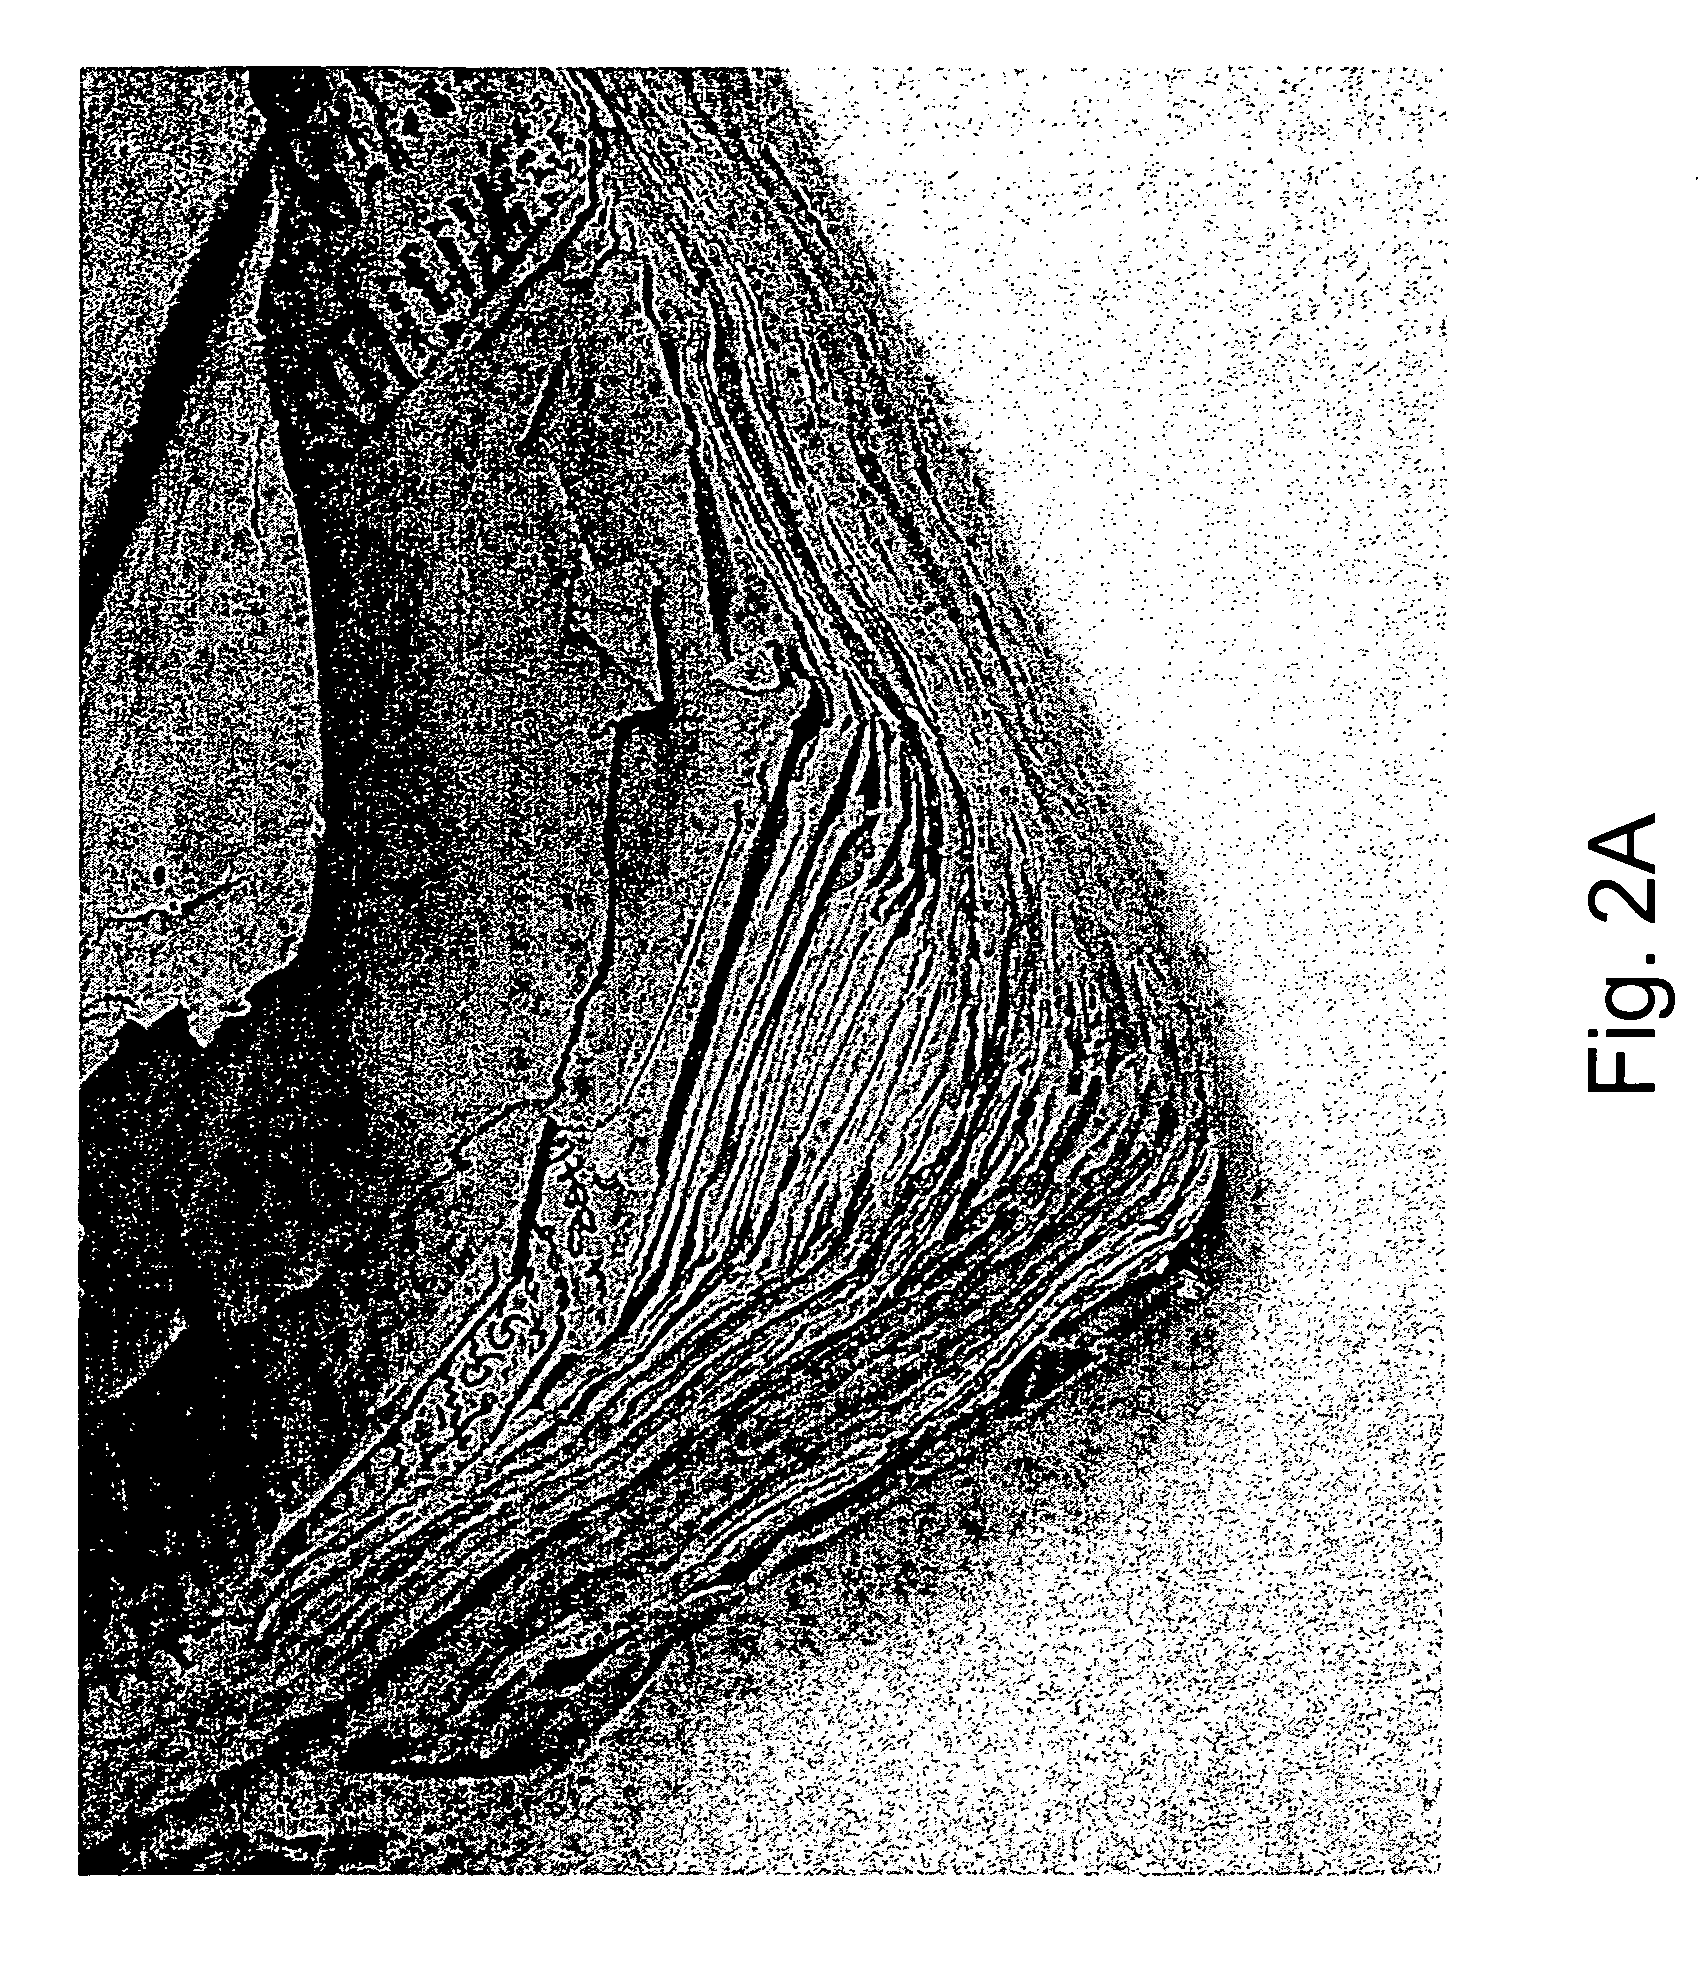 Methods and devices for humidity control of materials